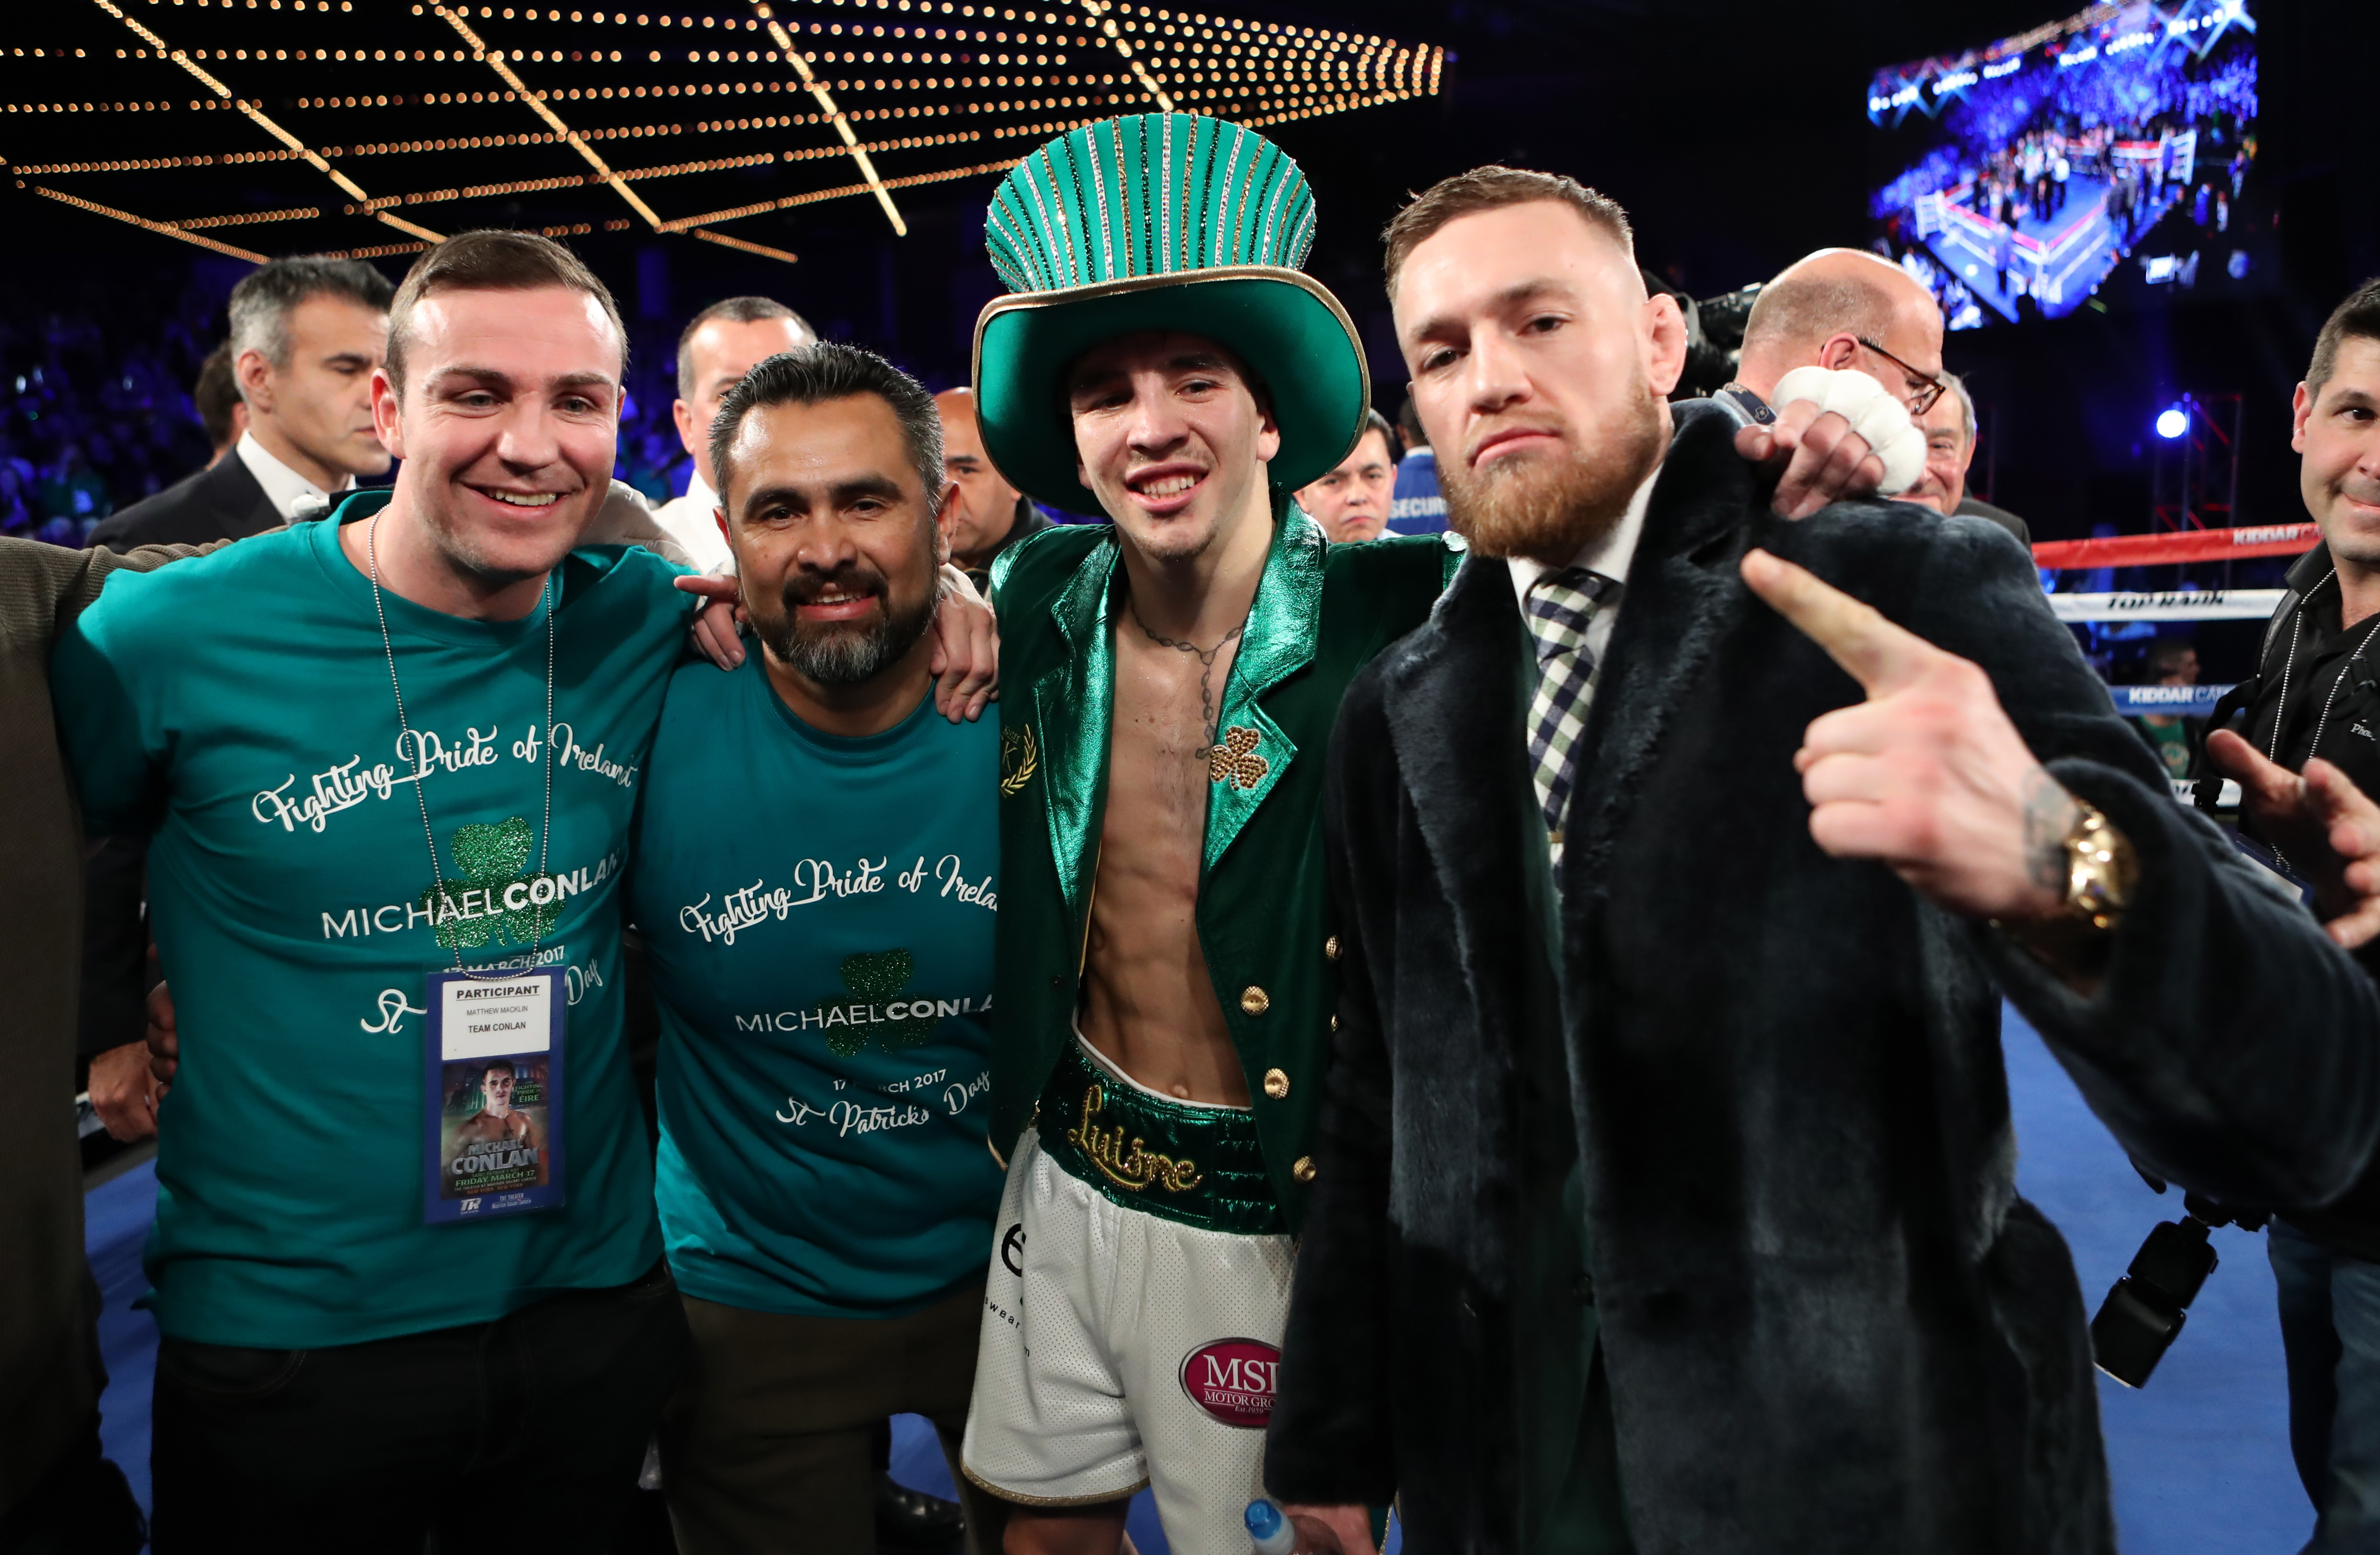 WATCH: Michael Conlan wins crushing pro debut victory following Conor McGregor's ring ...